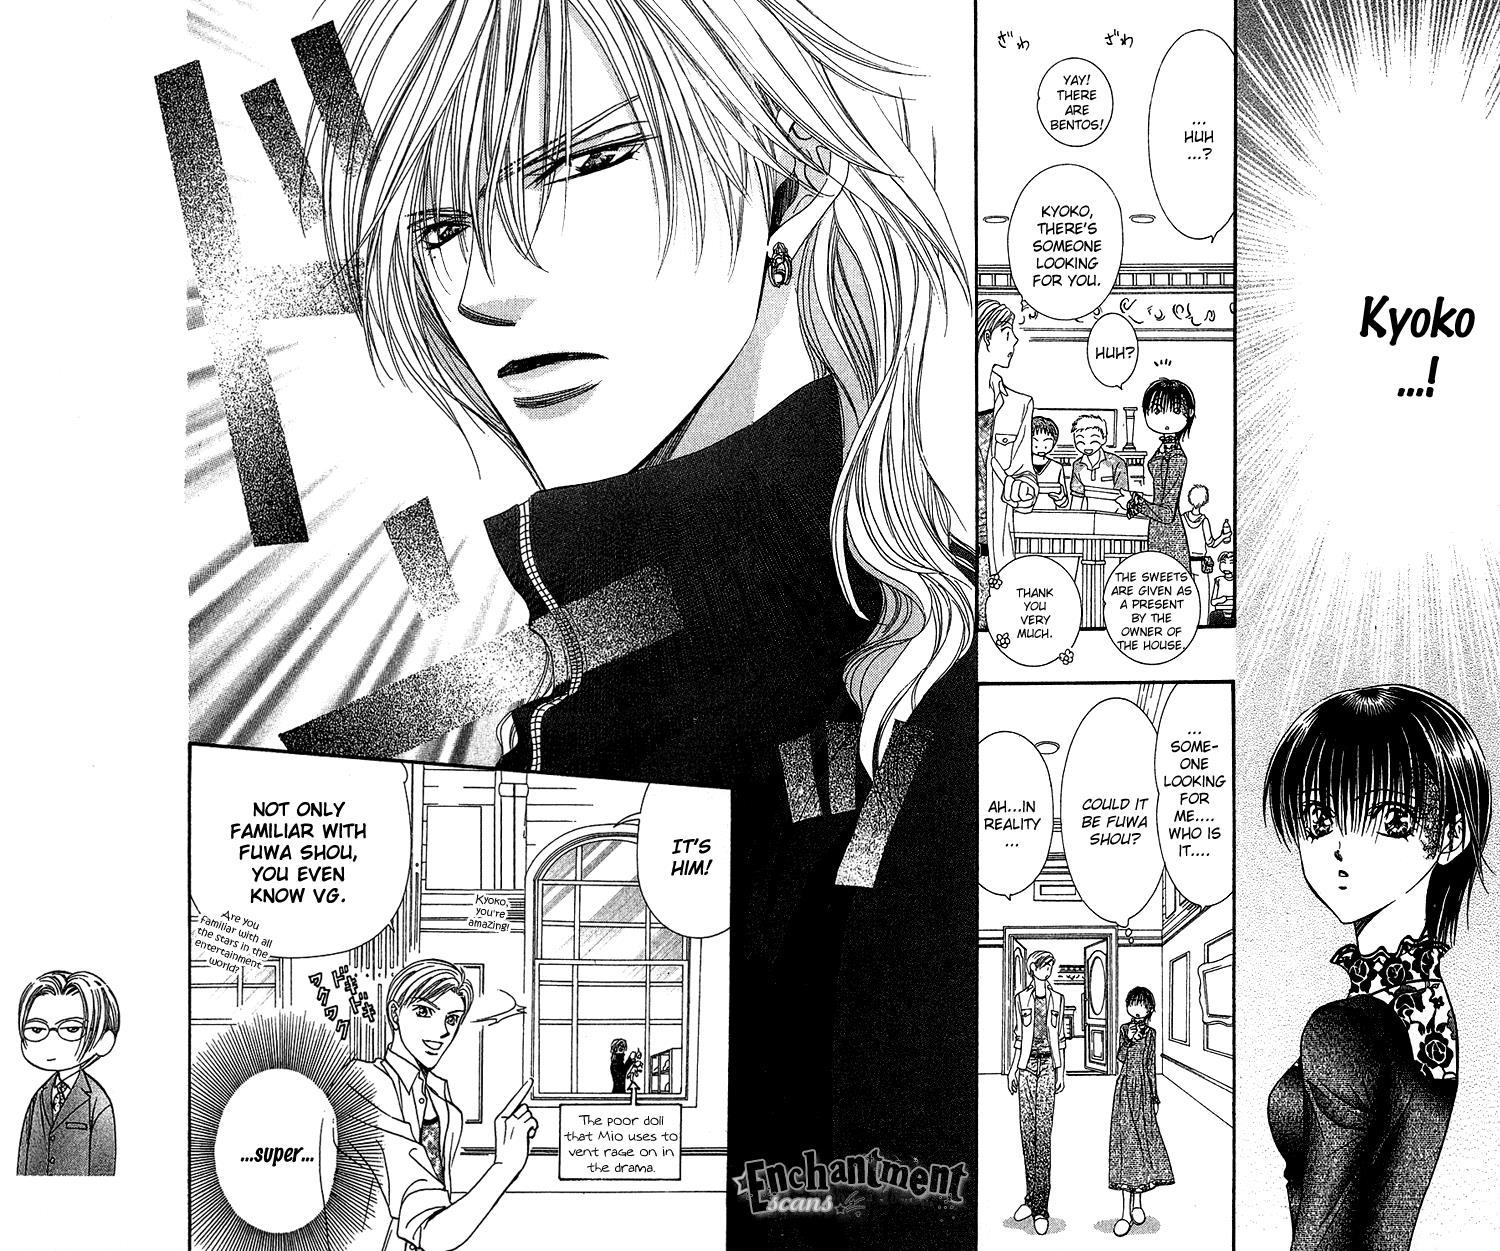 Skip Beat!, Chapter 87 Suddenly, a Love Story- Refrain, Part 1 image 14